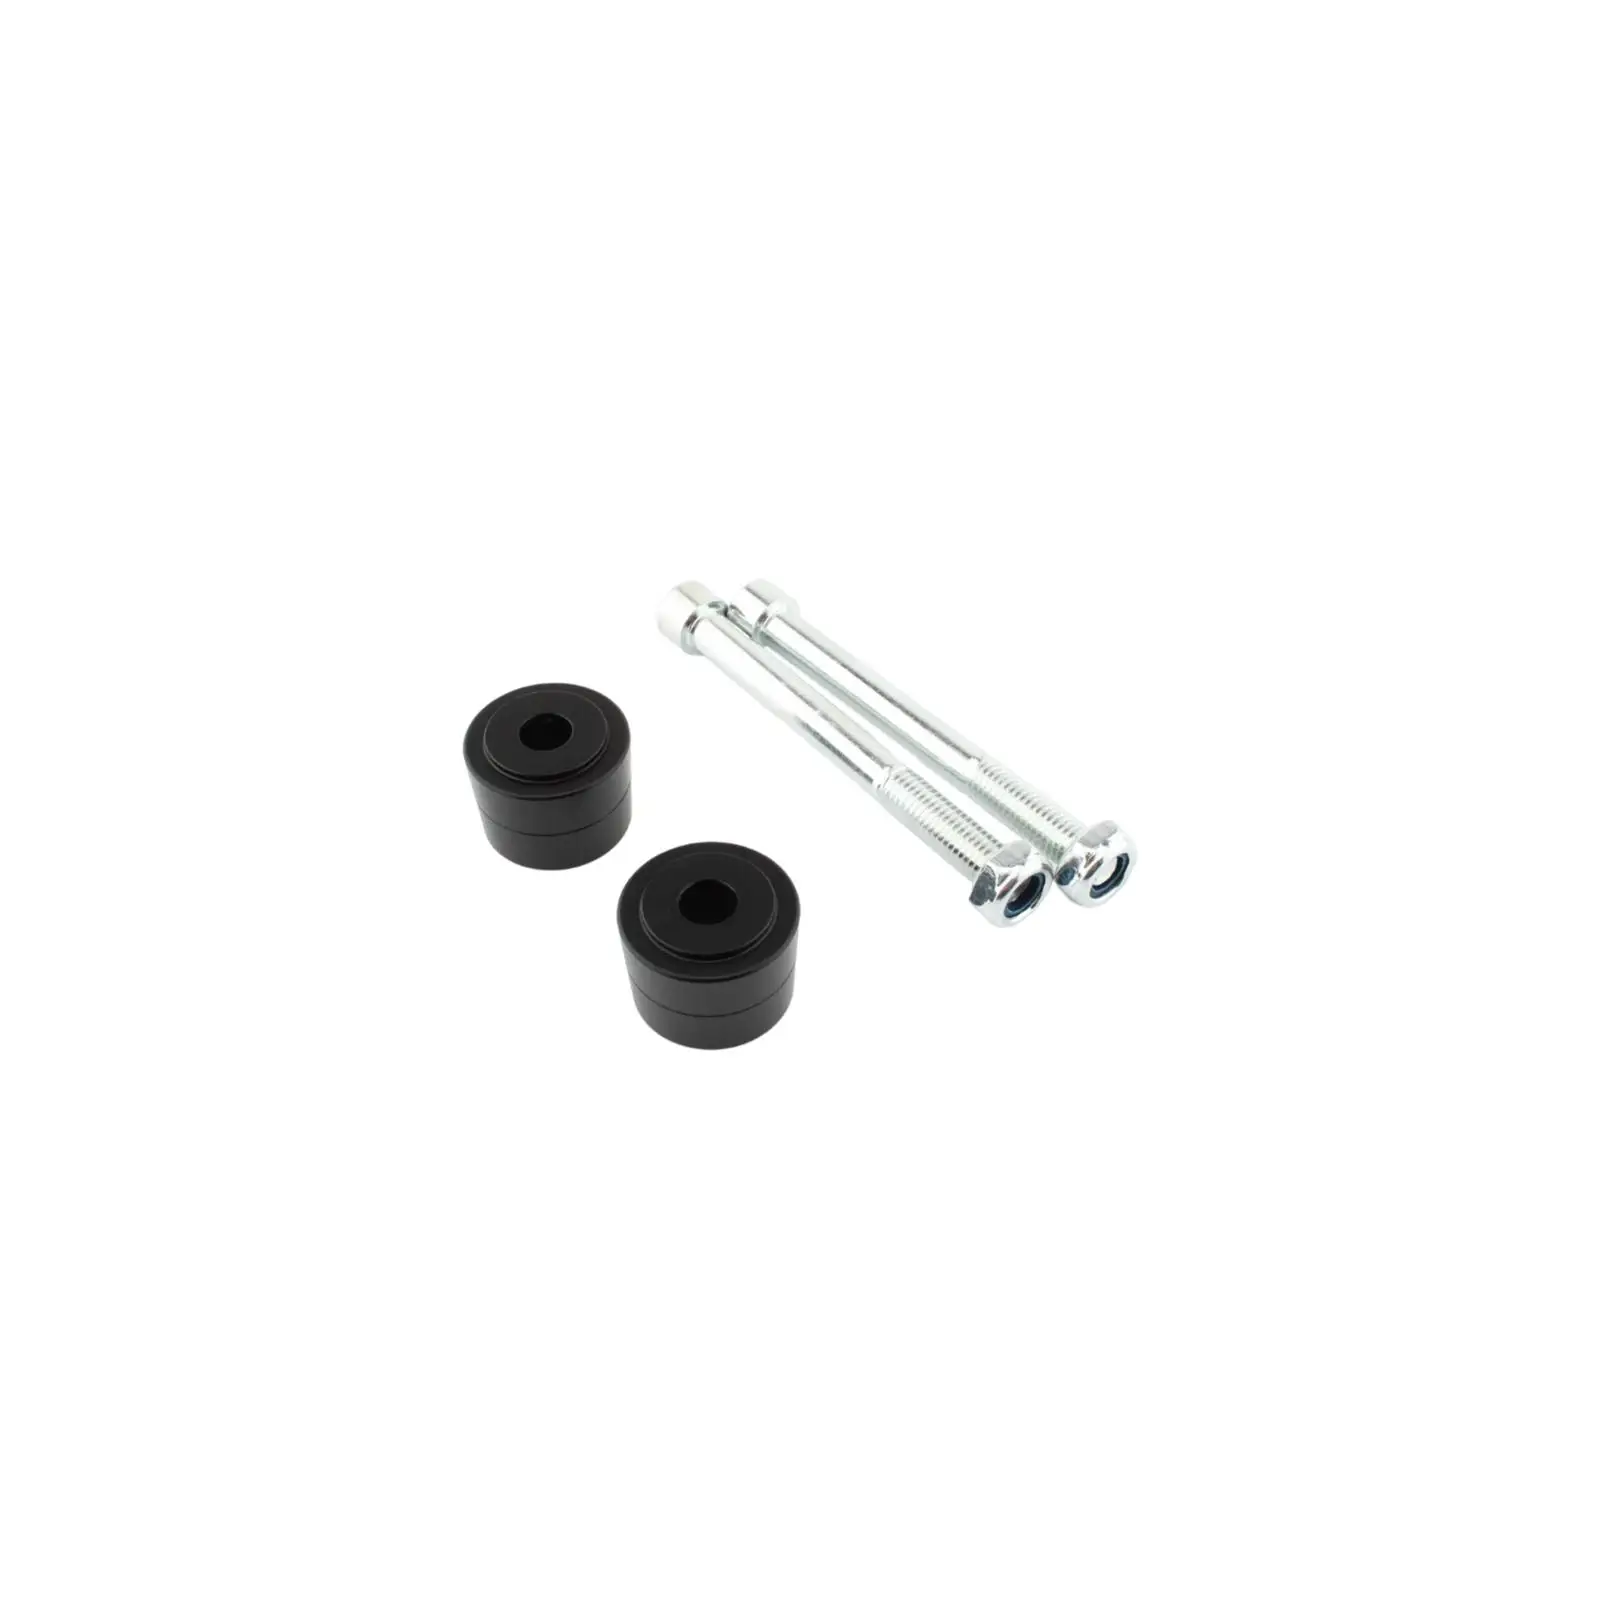 2x Handlebar Risers 23mm Height Mount Clamp Set for